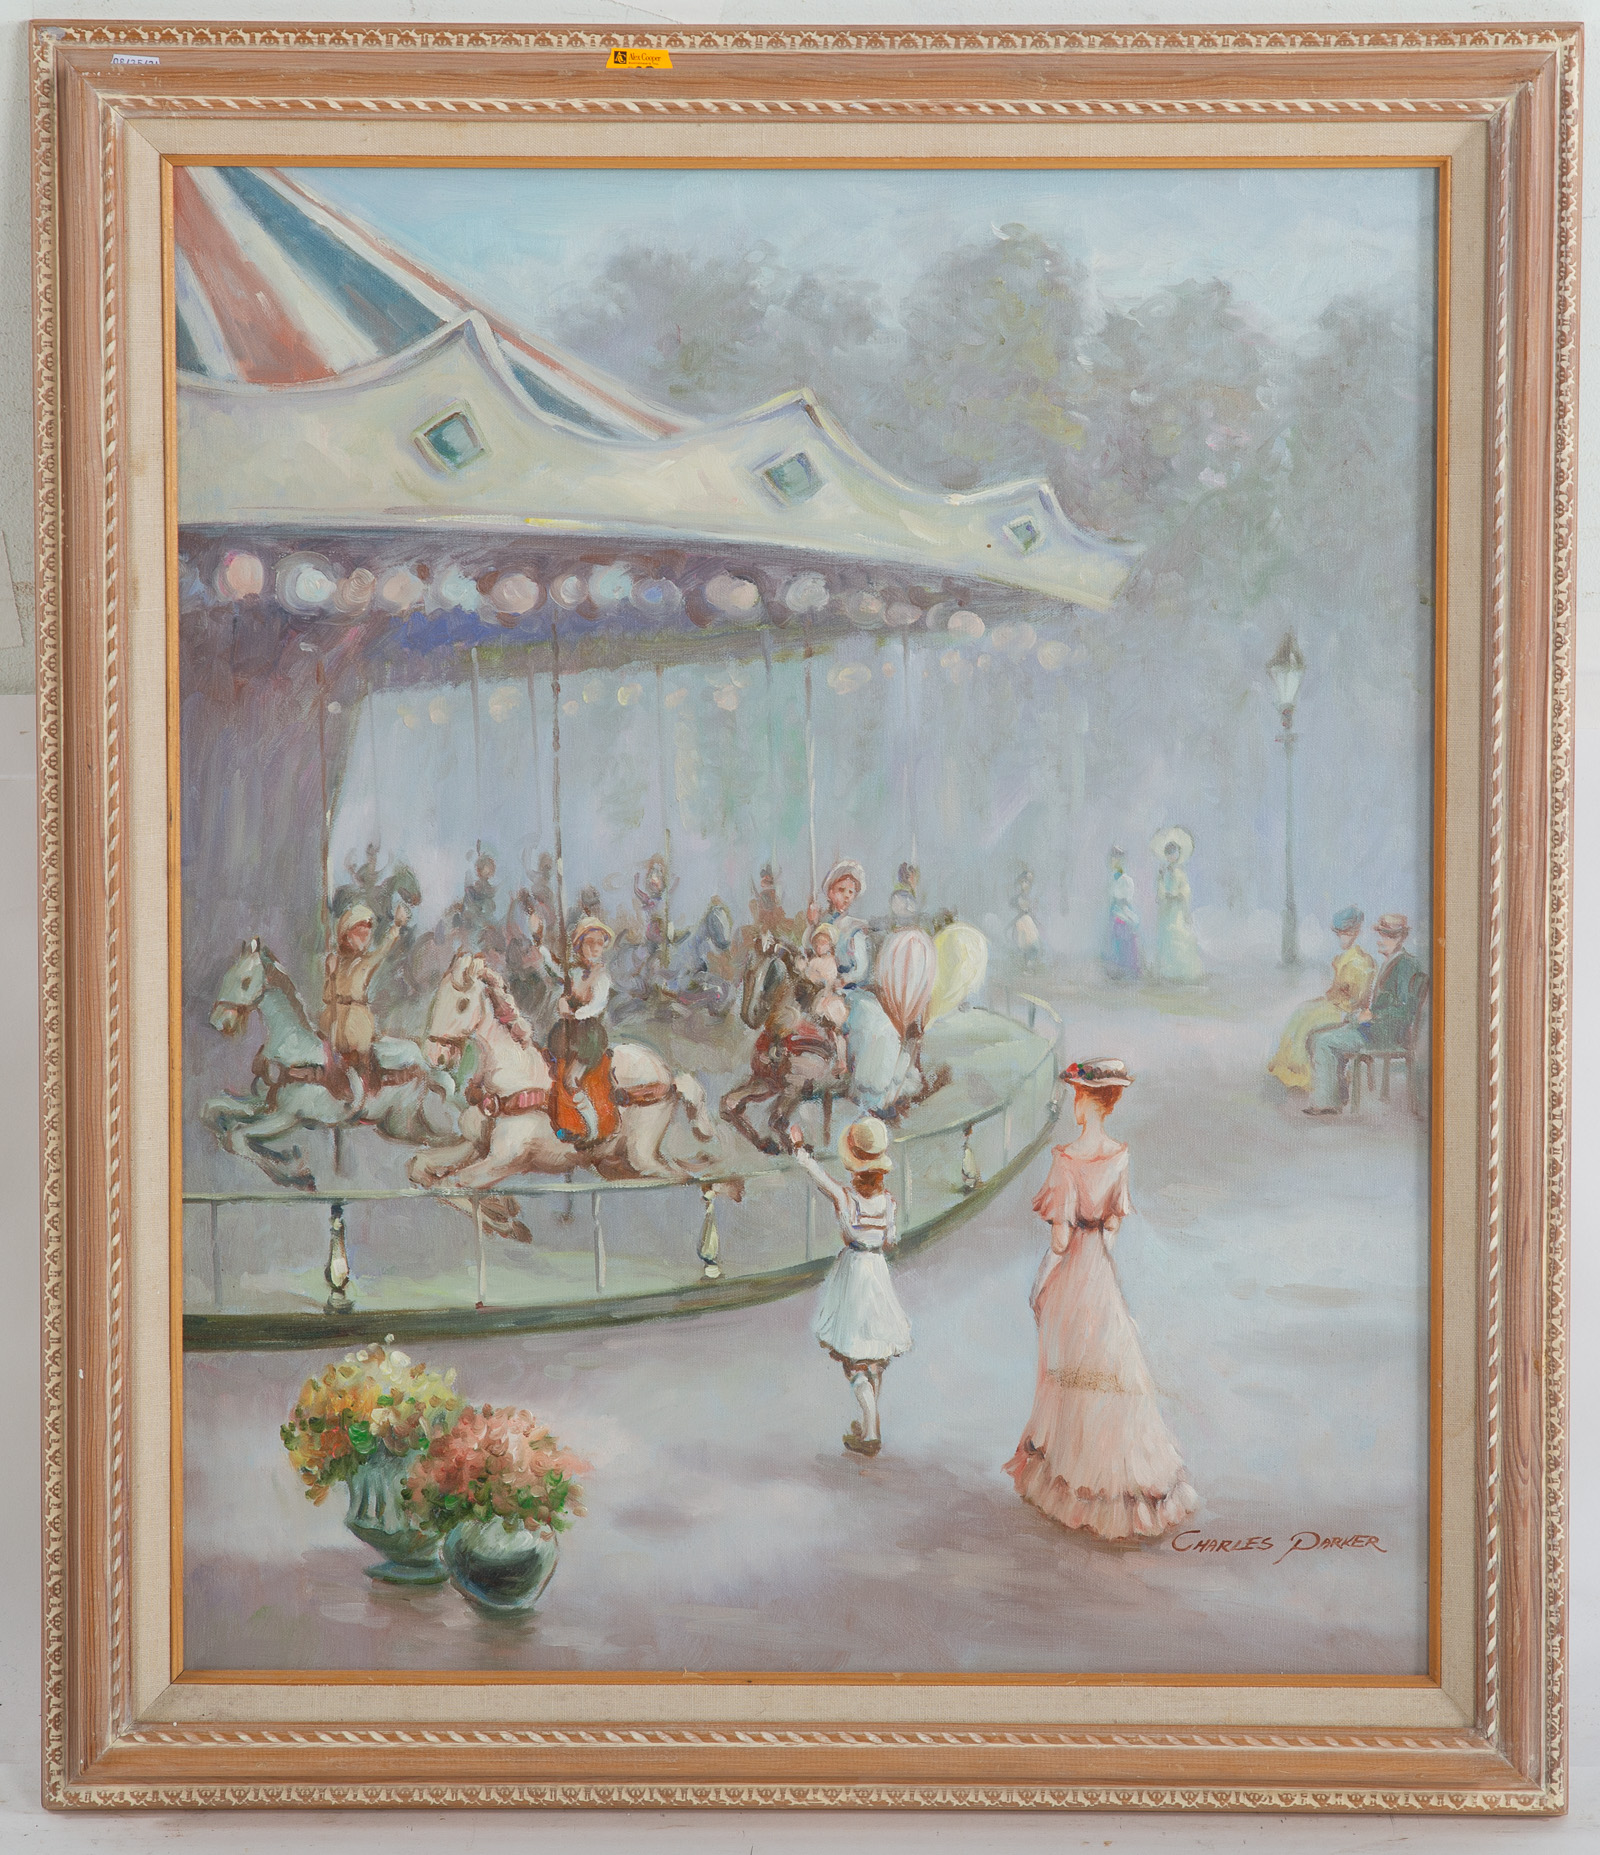 CHARLES PARKER. CAROUSEL IN THE